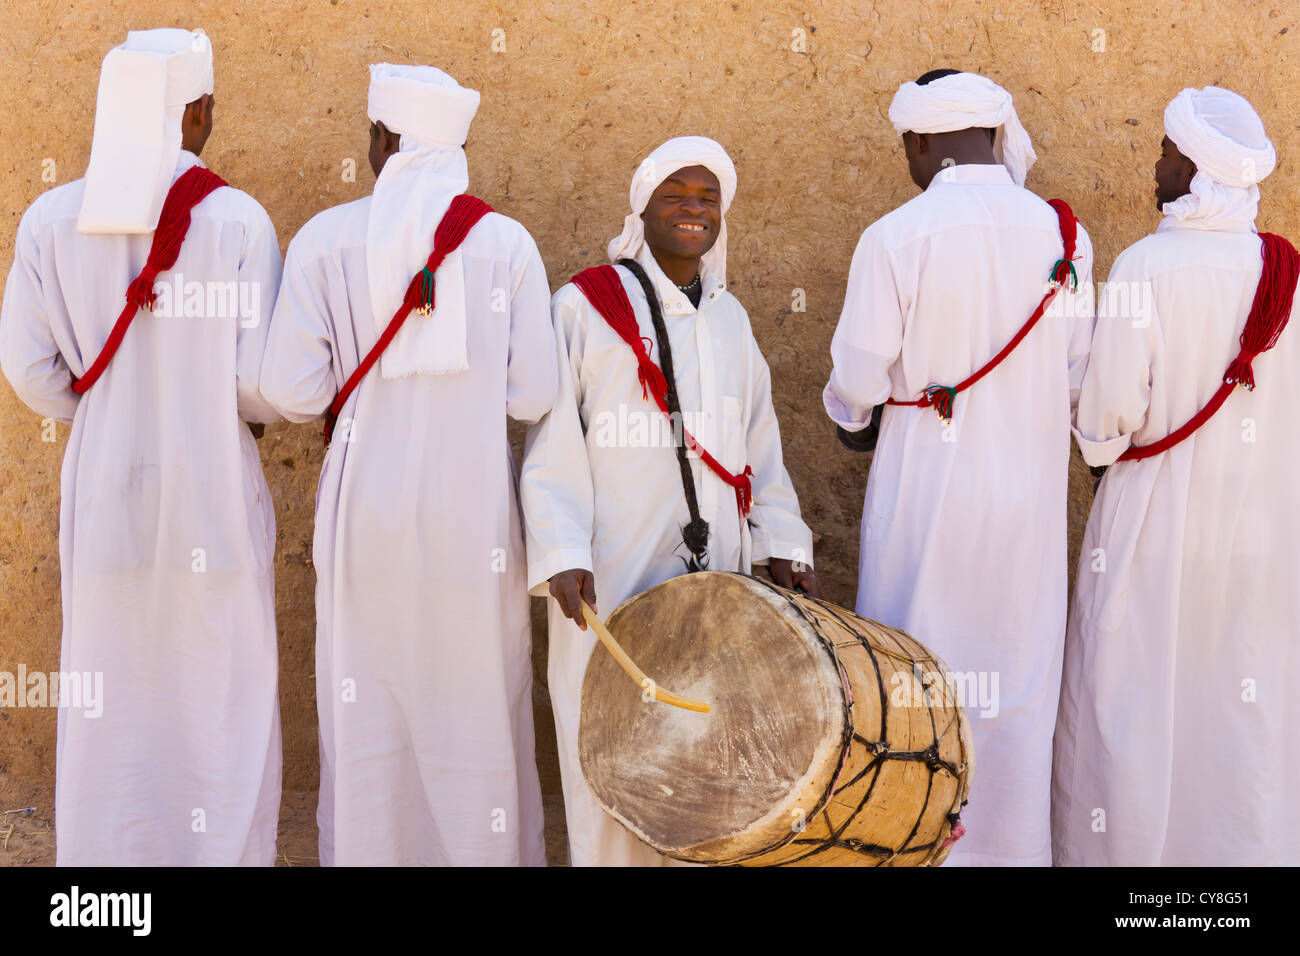 Musicians playing drumi, Morocco Stock Photo